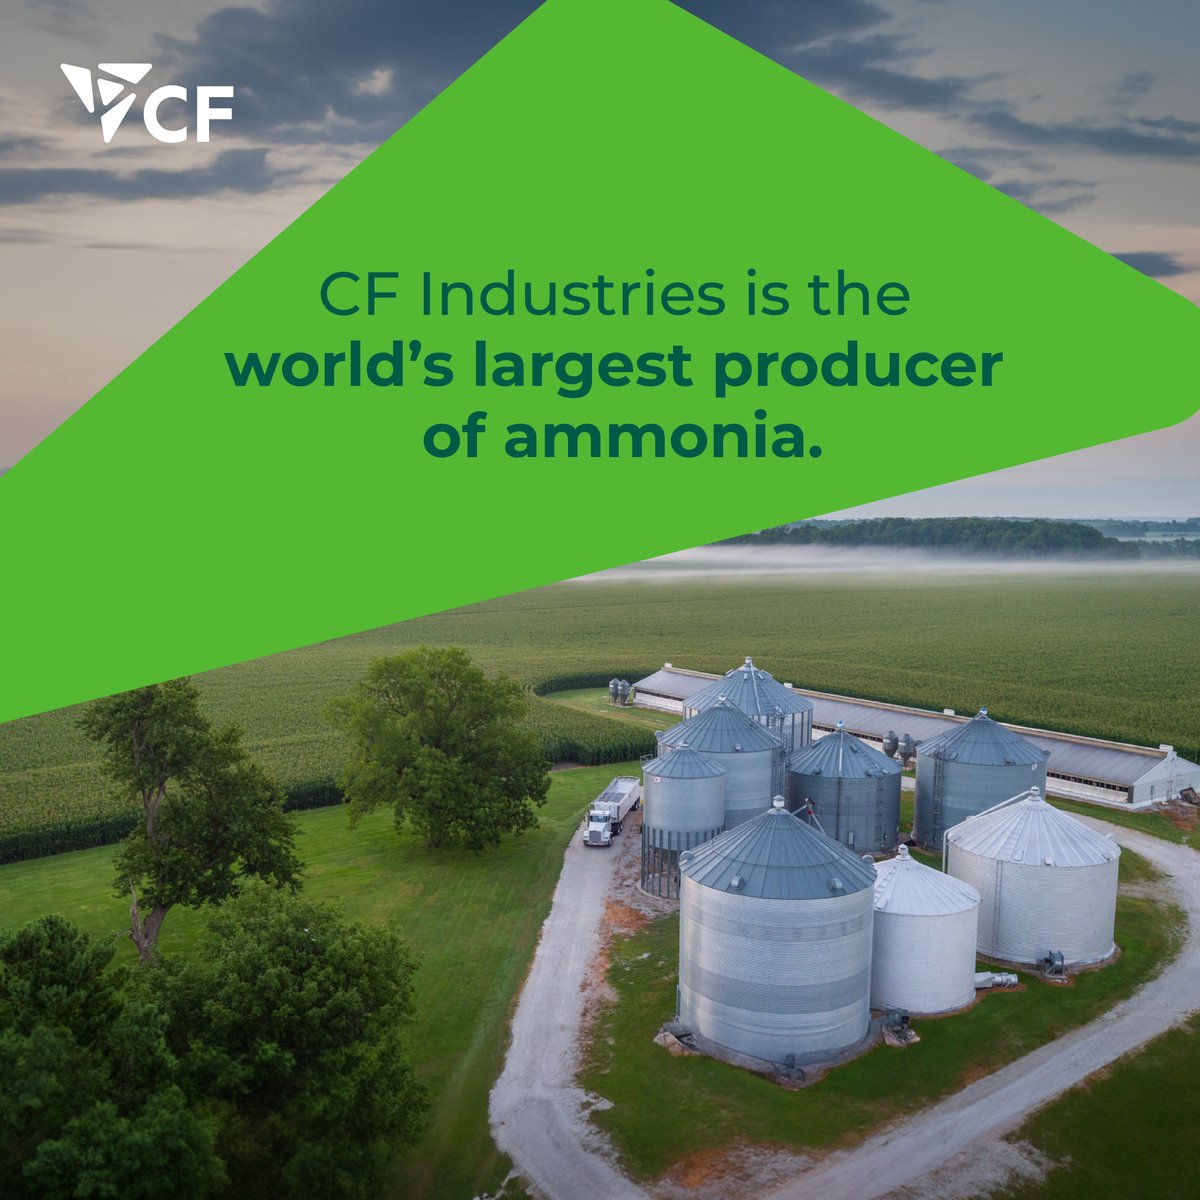 CF Industries is the world’s leading producer of ammonia and diesel exhaust fluid (DEF). DEF is used for emissions abatement purposes in the transportation industry. When combined with selective catalytic reduction technology, it reduces emissions from diesel trucks by up to 90%.